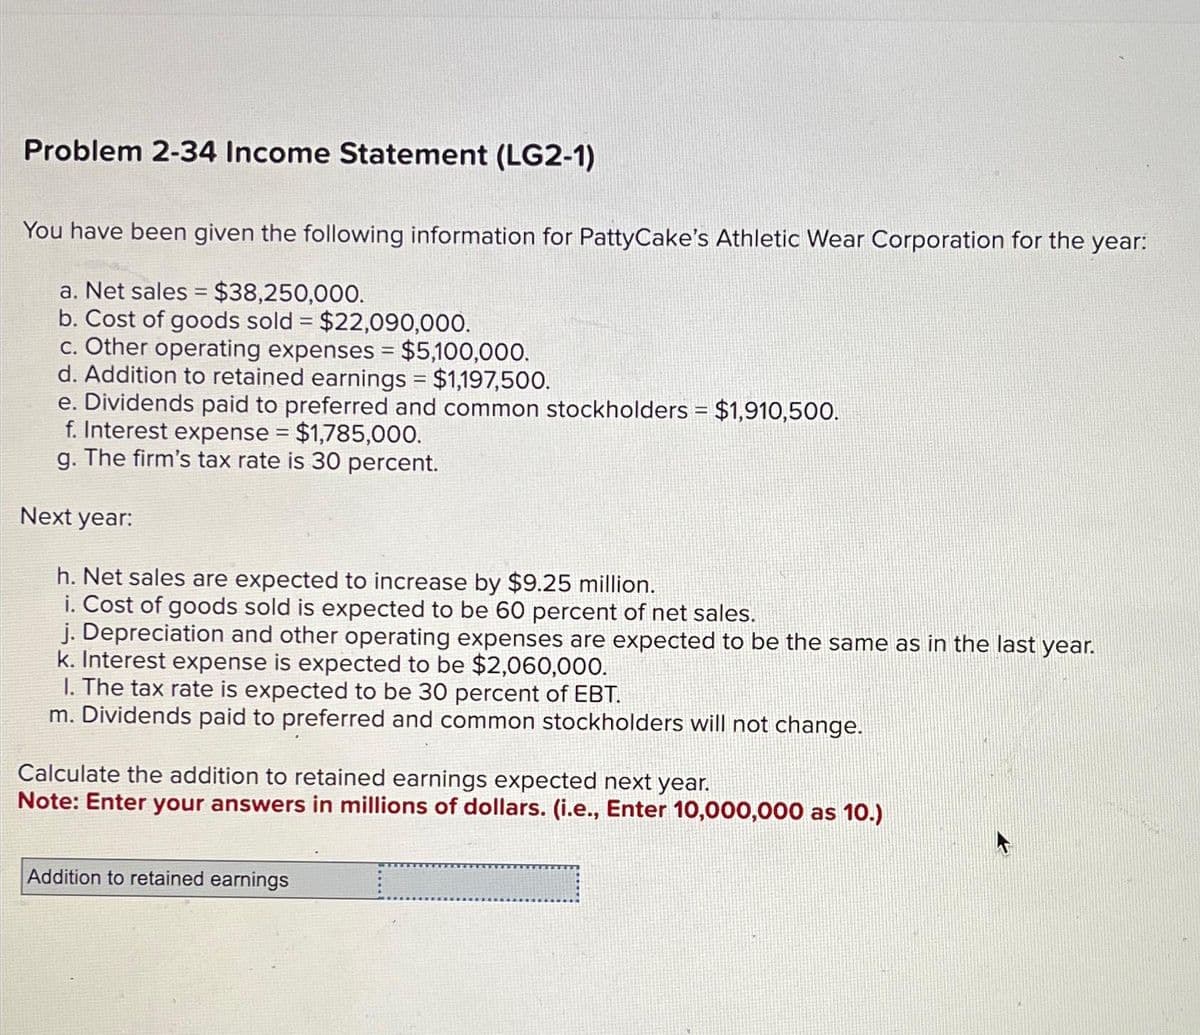 Problem 2-34 Income Statement (LG2-1)
You have been given the following information for PattyCake's Athletic Wear Corporation for the year:
a. Net sales = $38,250,000.
b. Cost of goods sold = $22,090,000.
c. Other operating expenses = $5,100,000.
d. Addition to retained earnings = $1,197,500.
e. Dividends paid to preferred and common stockholders = $1,910,500.
f. Interest expense = $1,785,000.
g. The firm's tax rate is 30 percent.
Next year:
h. Net sales are expected to increase by $9.25 million.
i. Cost of goods sold is expected to be 60 percent of net sales.
j. Depreciation and other operating expenses are expected to be the same as in the last year.
k. Interest expense is expected to be $2,060,000.
1. The tax rate is expected to be 30 percent of EBT.
m. Dividends paid to preferred and common stockholders will not change.
Calculate the addition to retained earnings expected next year.
Note: Enter your answers in millions of dollars. (i.e., Enter 10,000,000 as 10.)
Addition to retained earnings